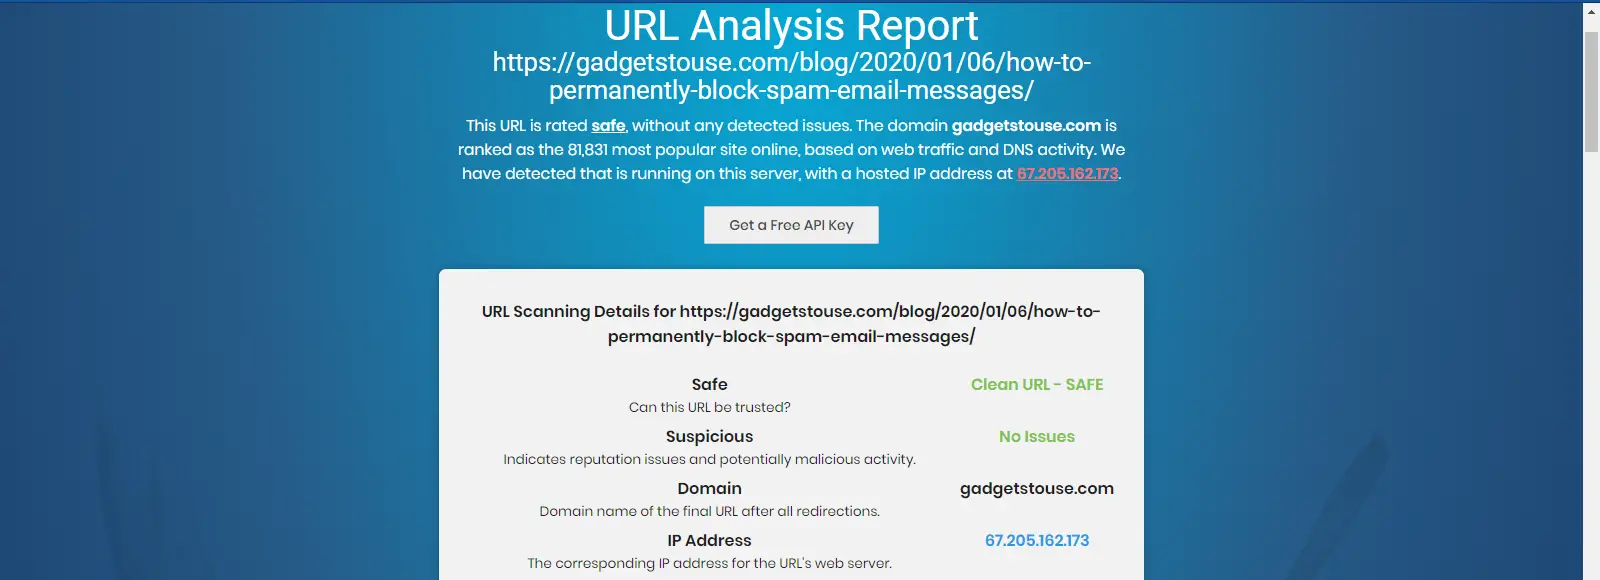 Check Suspicious Links in Email